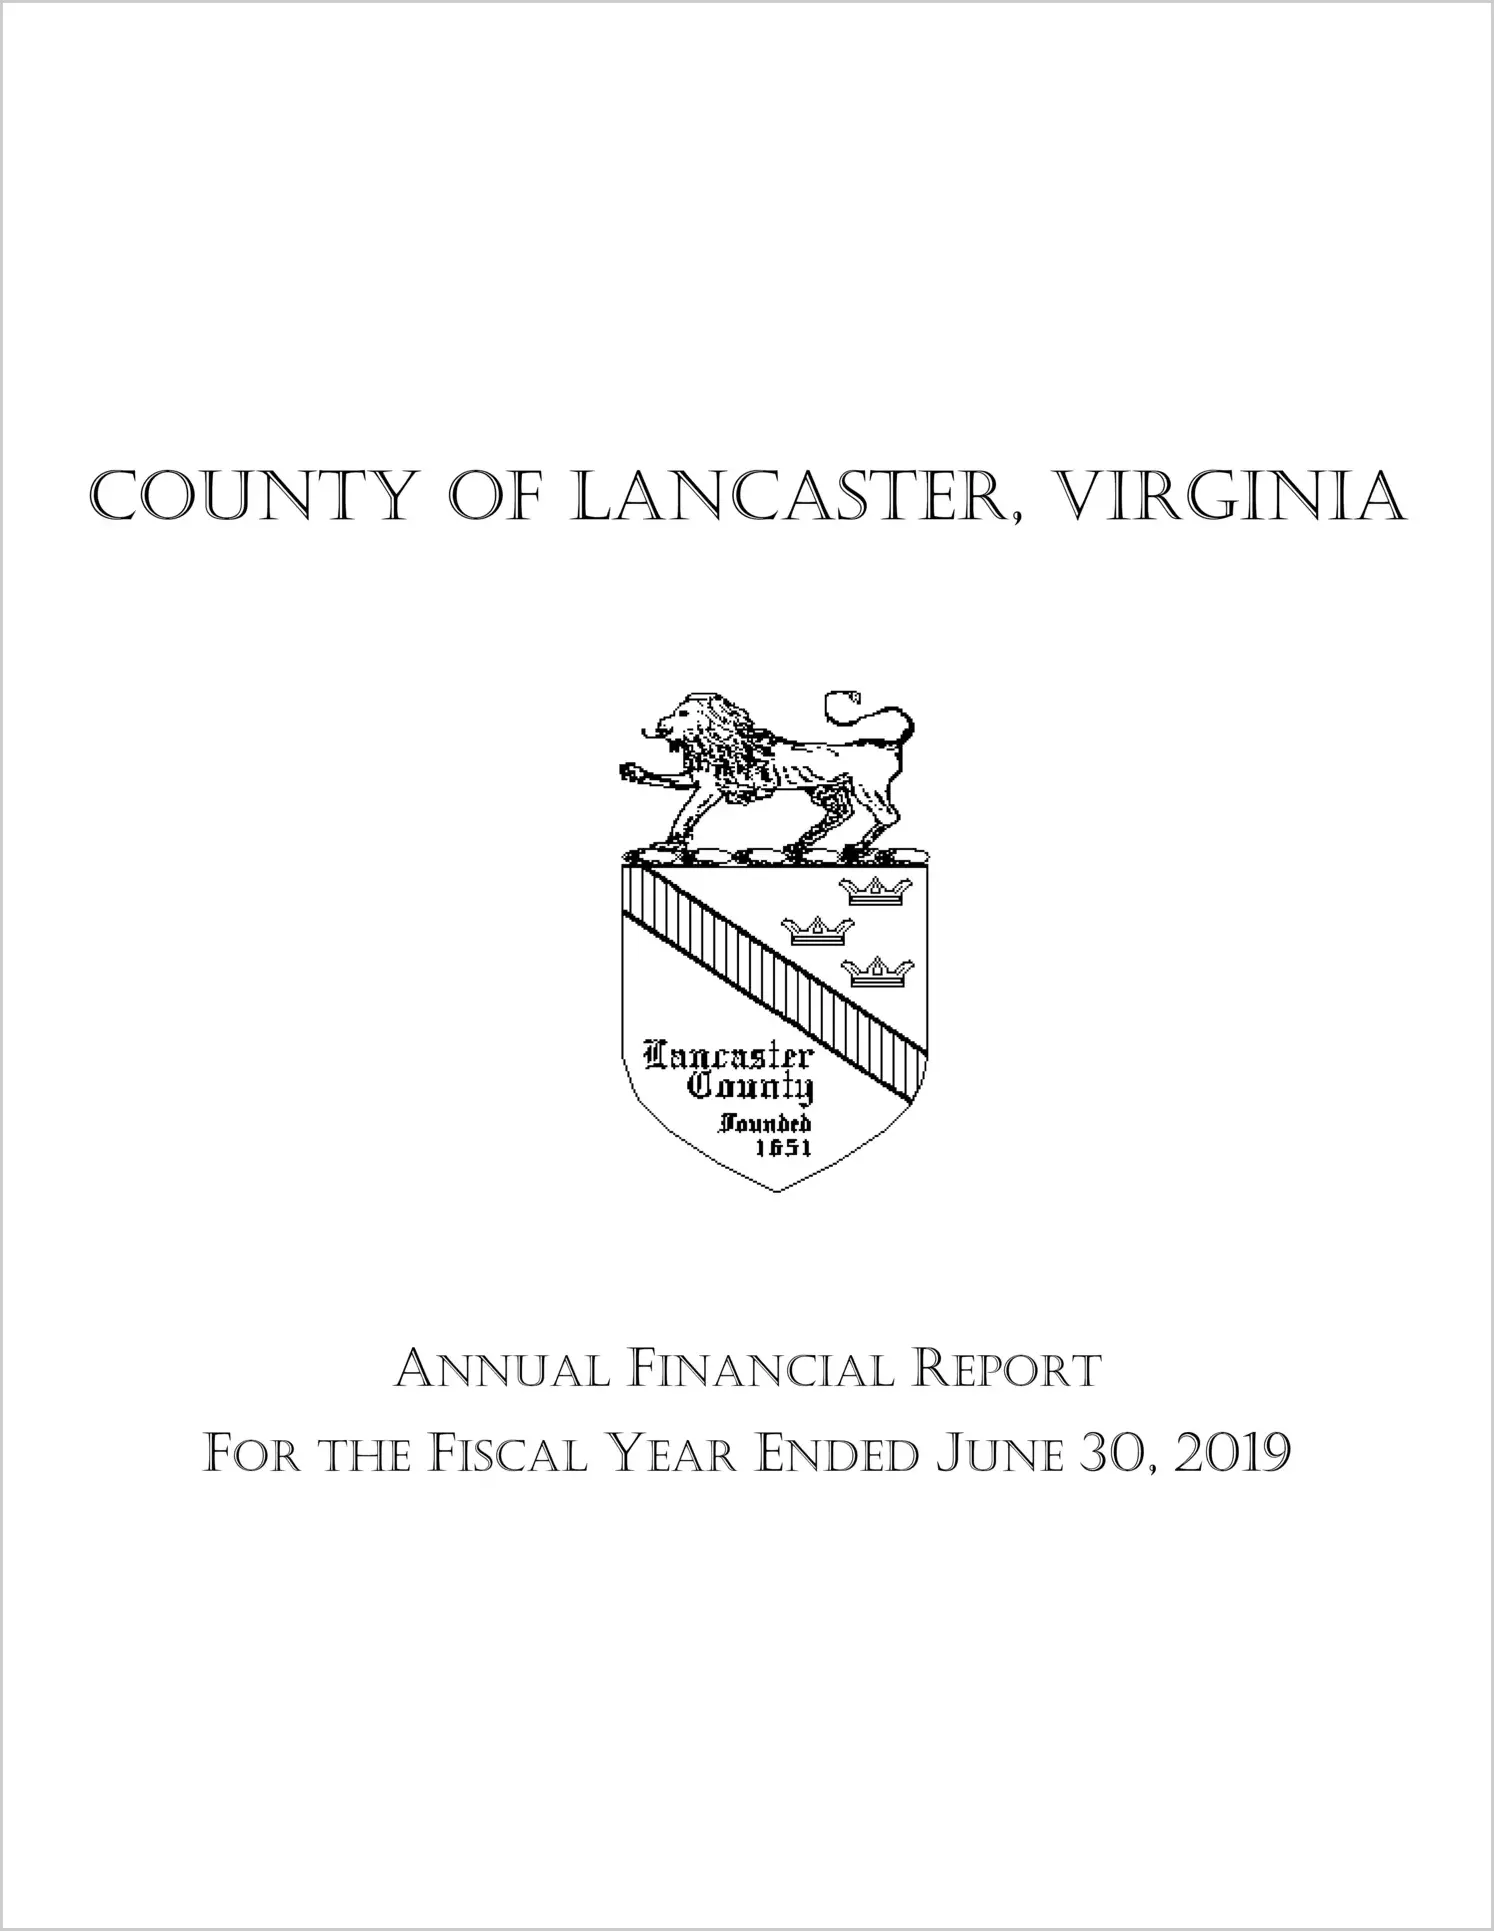 2019 Annual Financial Report for County of Lancaster